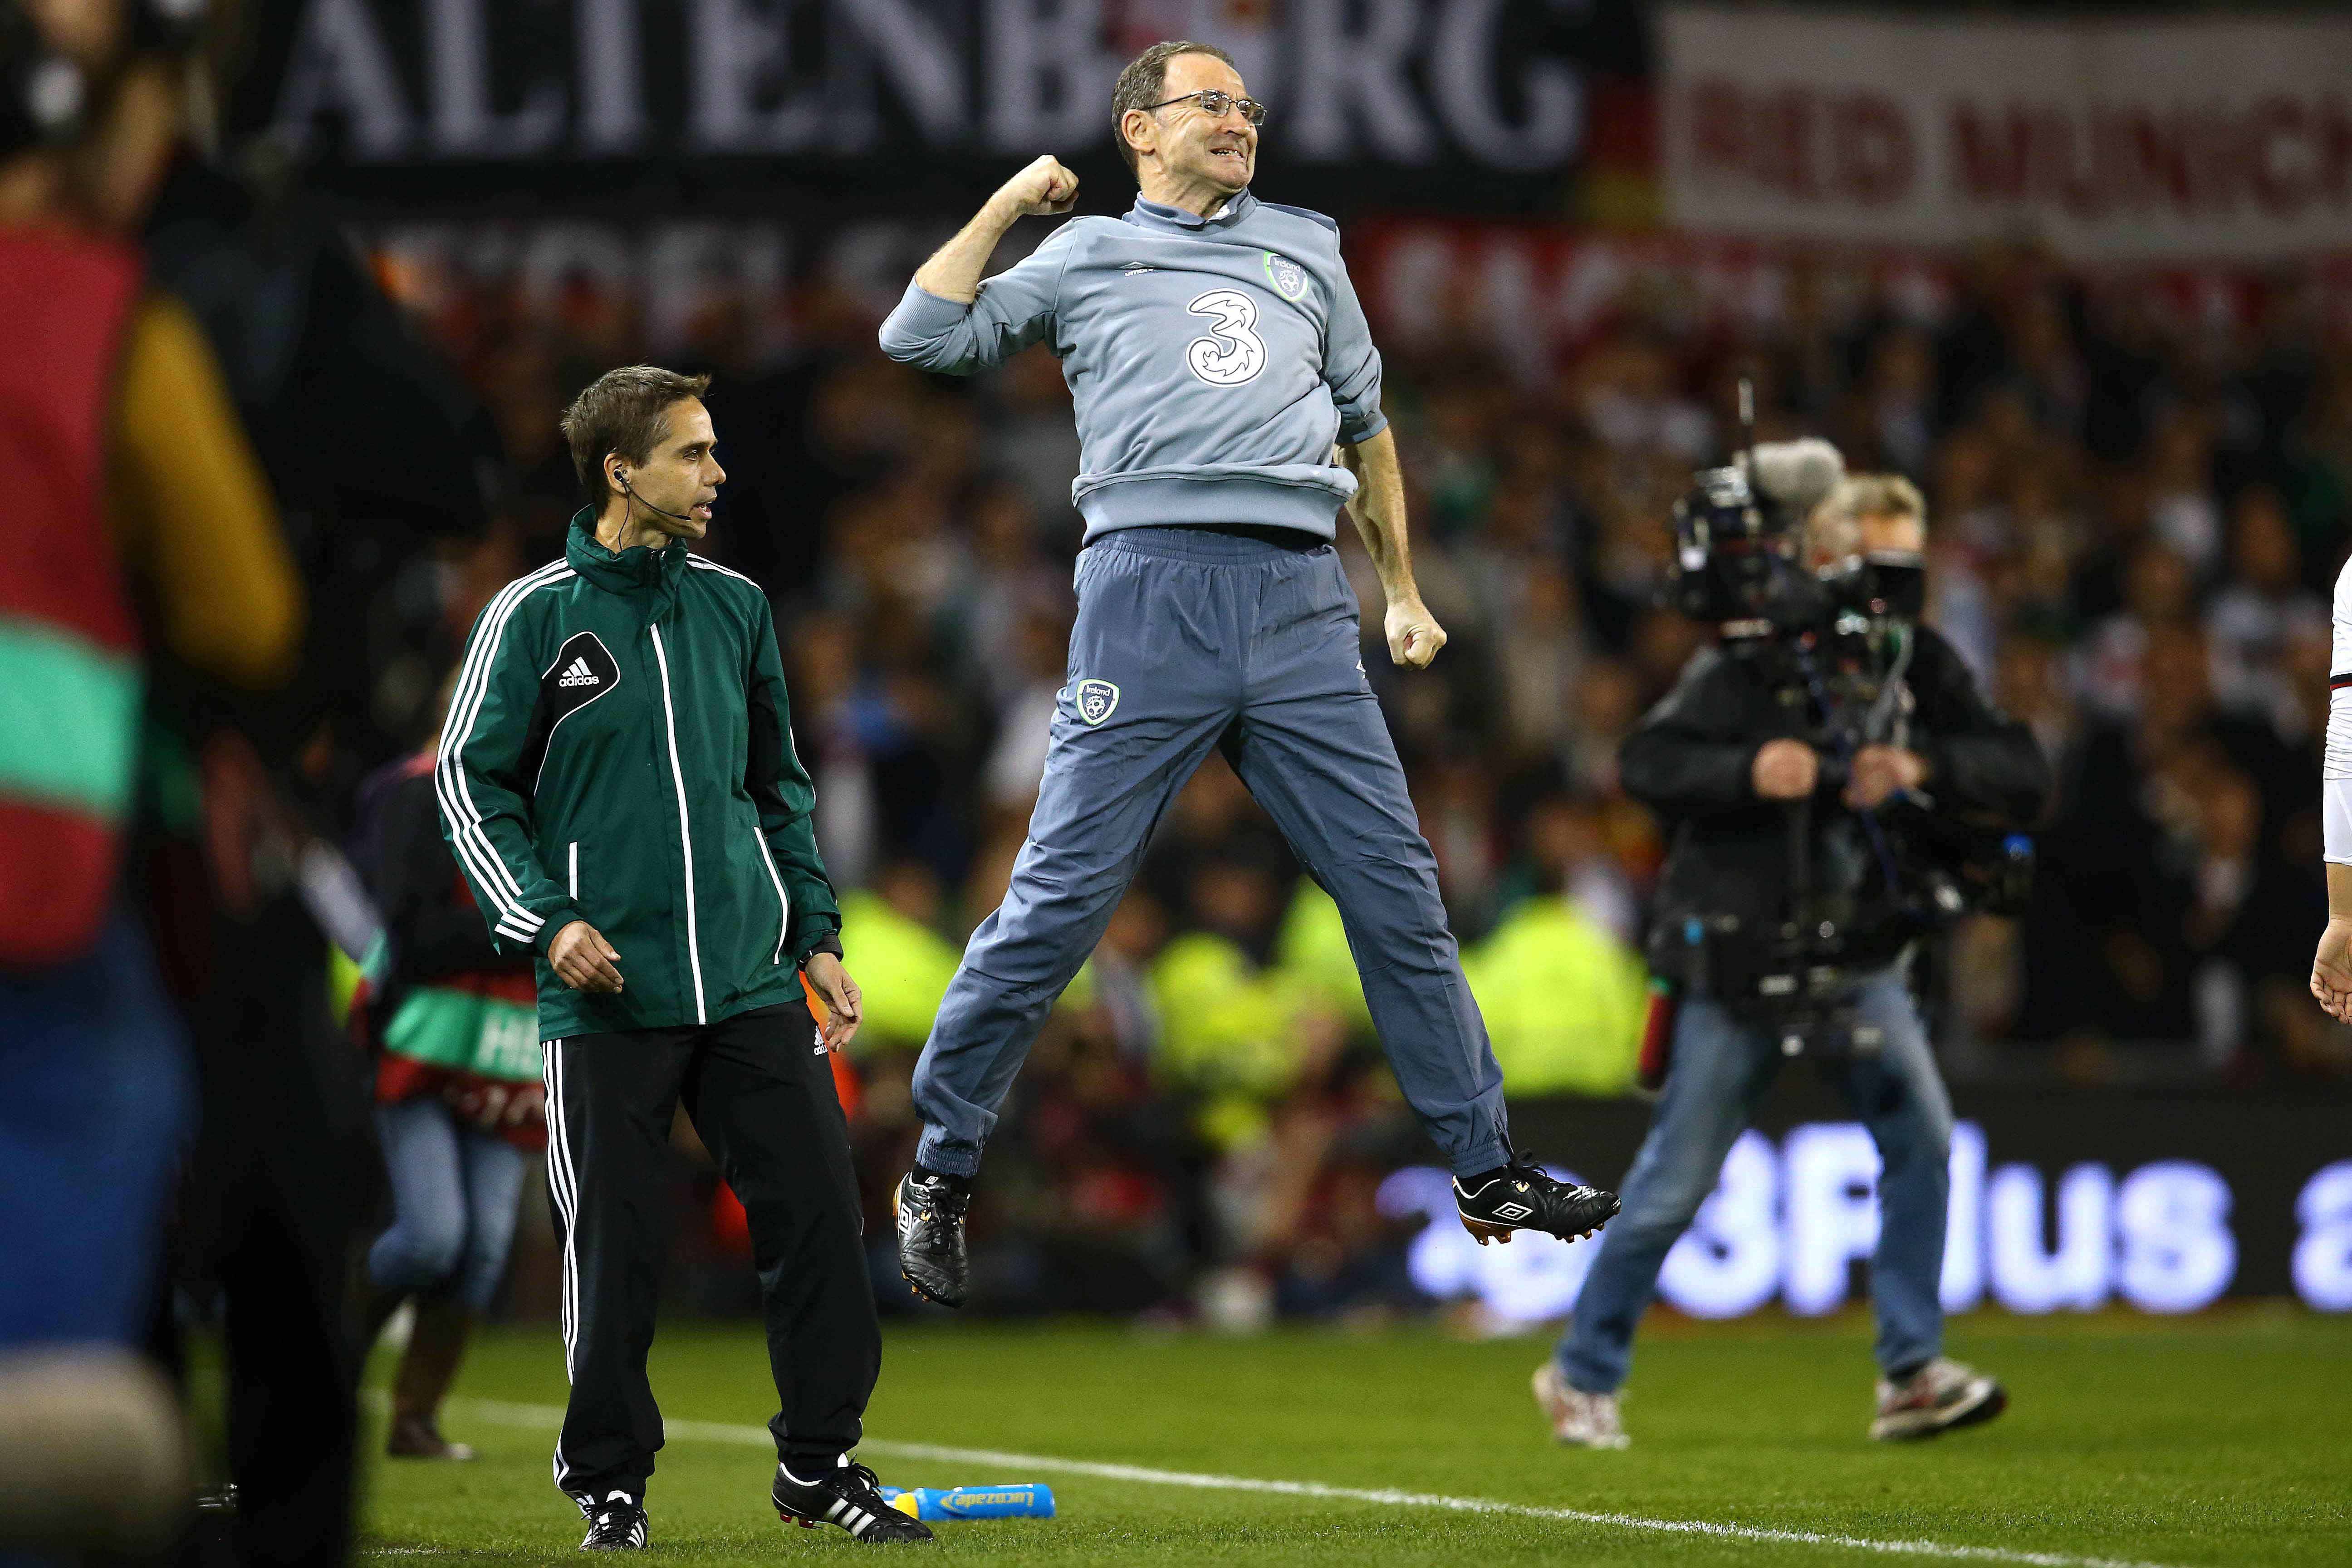 Inpho Pictures of the Year 2015 21/12/2015 UEFA EURO 2016 Qualifier, Aviva Stadium, Dublin 8/10/2015 Republic of Ireland vs Germany Ireland manager Martin OÕNeill celebrates at the final whistle Mandatory Credit ©INPHO/Cathal Noonan